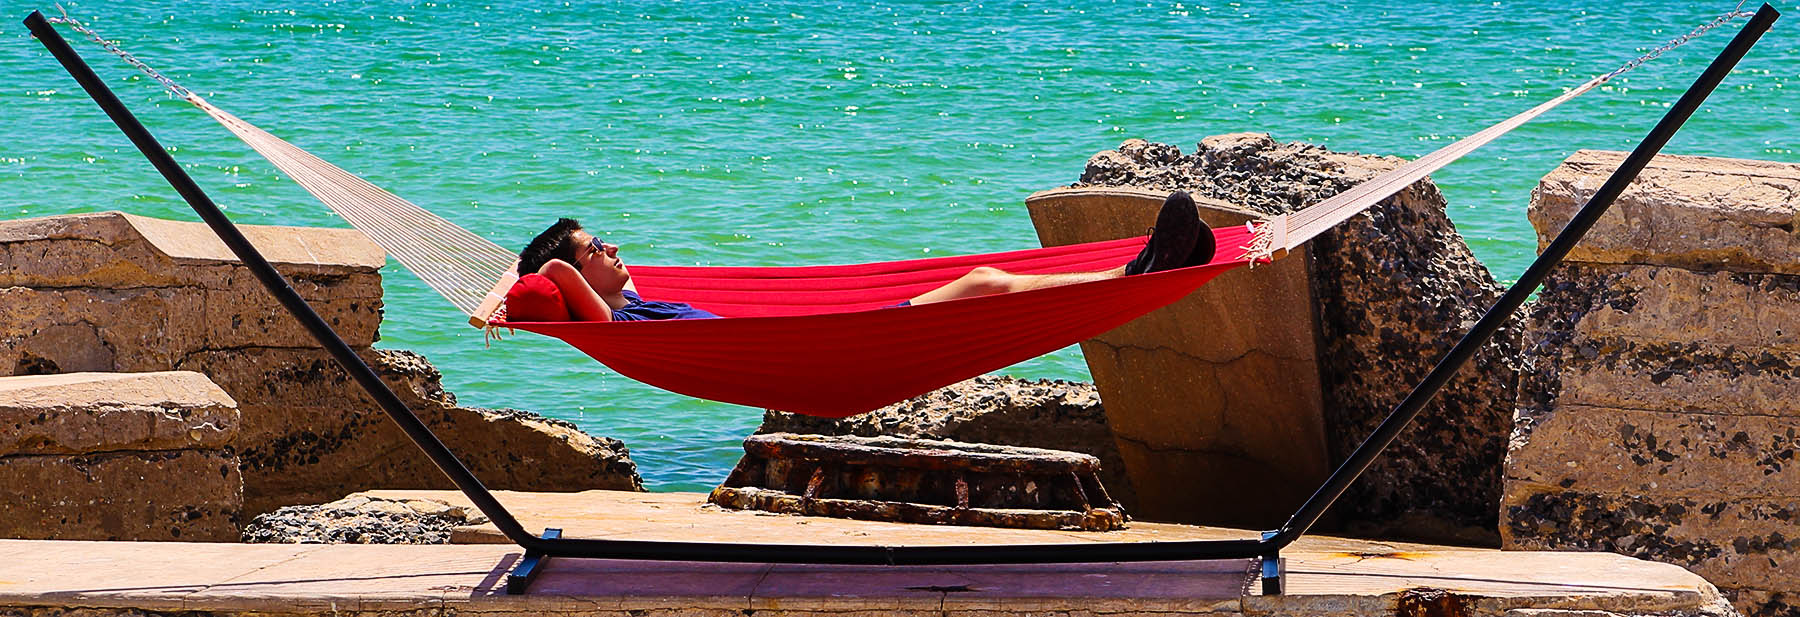 young man resting in a red hammock and stand by the ocean